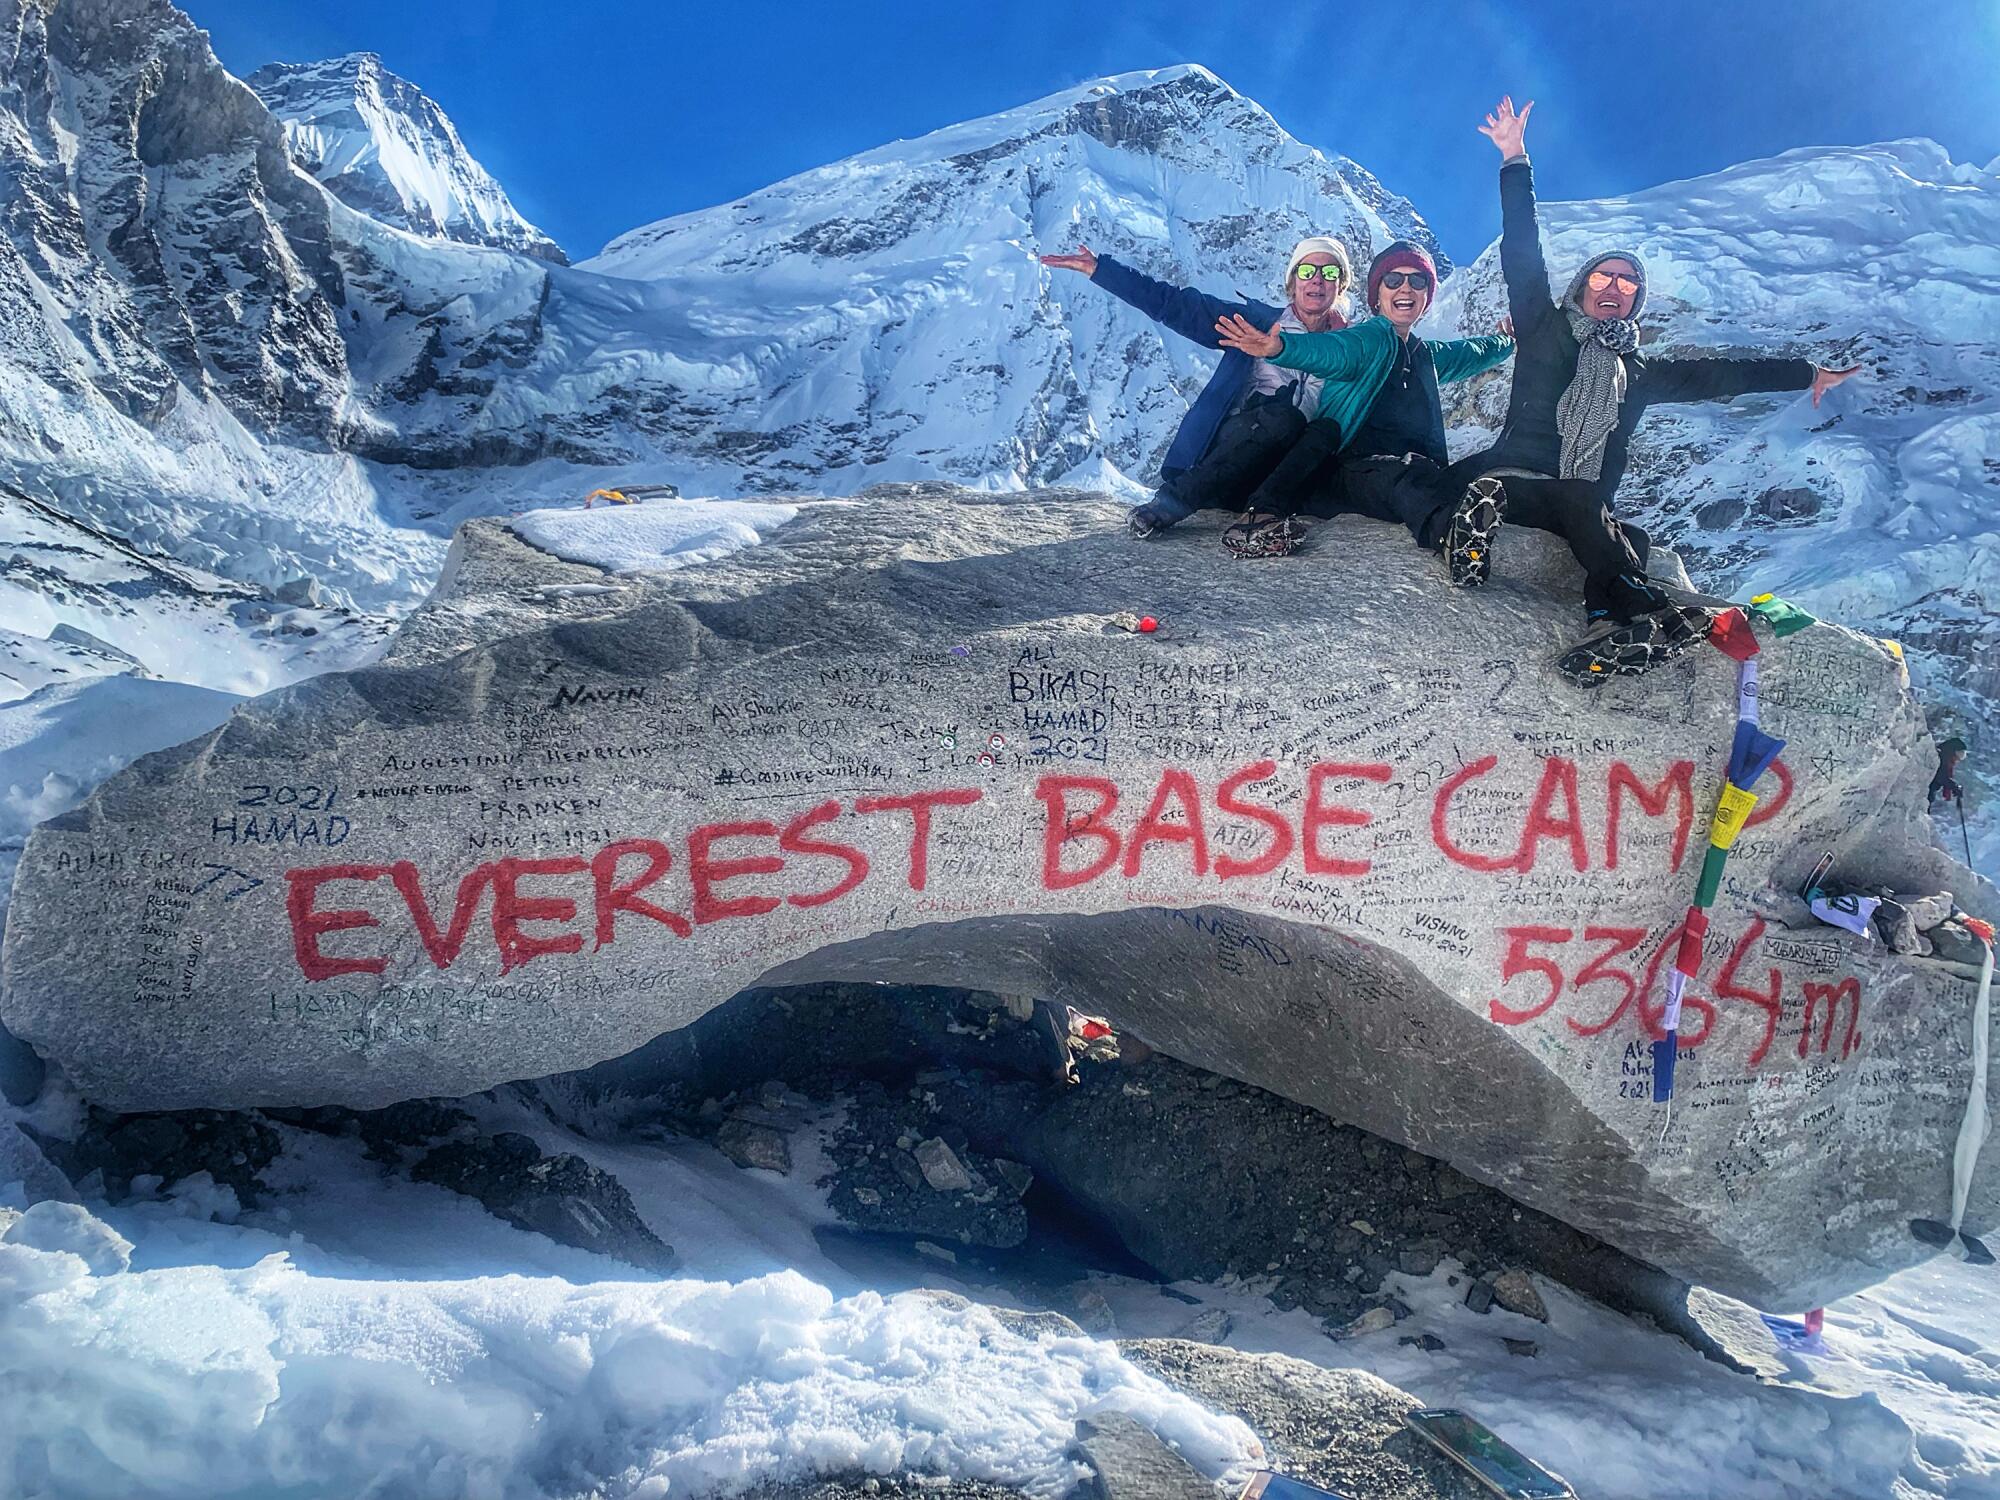 Three women celebrate atop a rock marking Everest Base Camp in Nepal, elevation 5,364 meters, or approximately 17,598 feet.